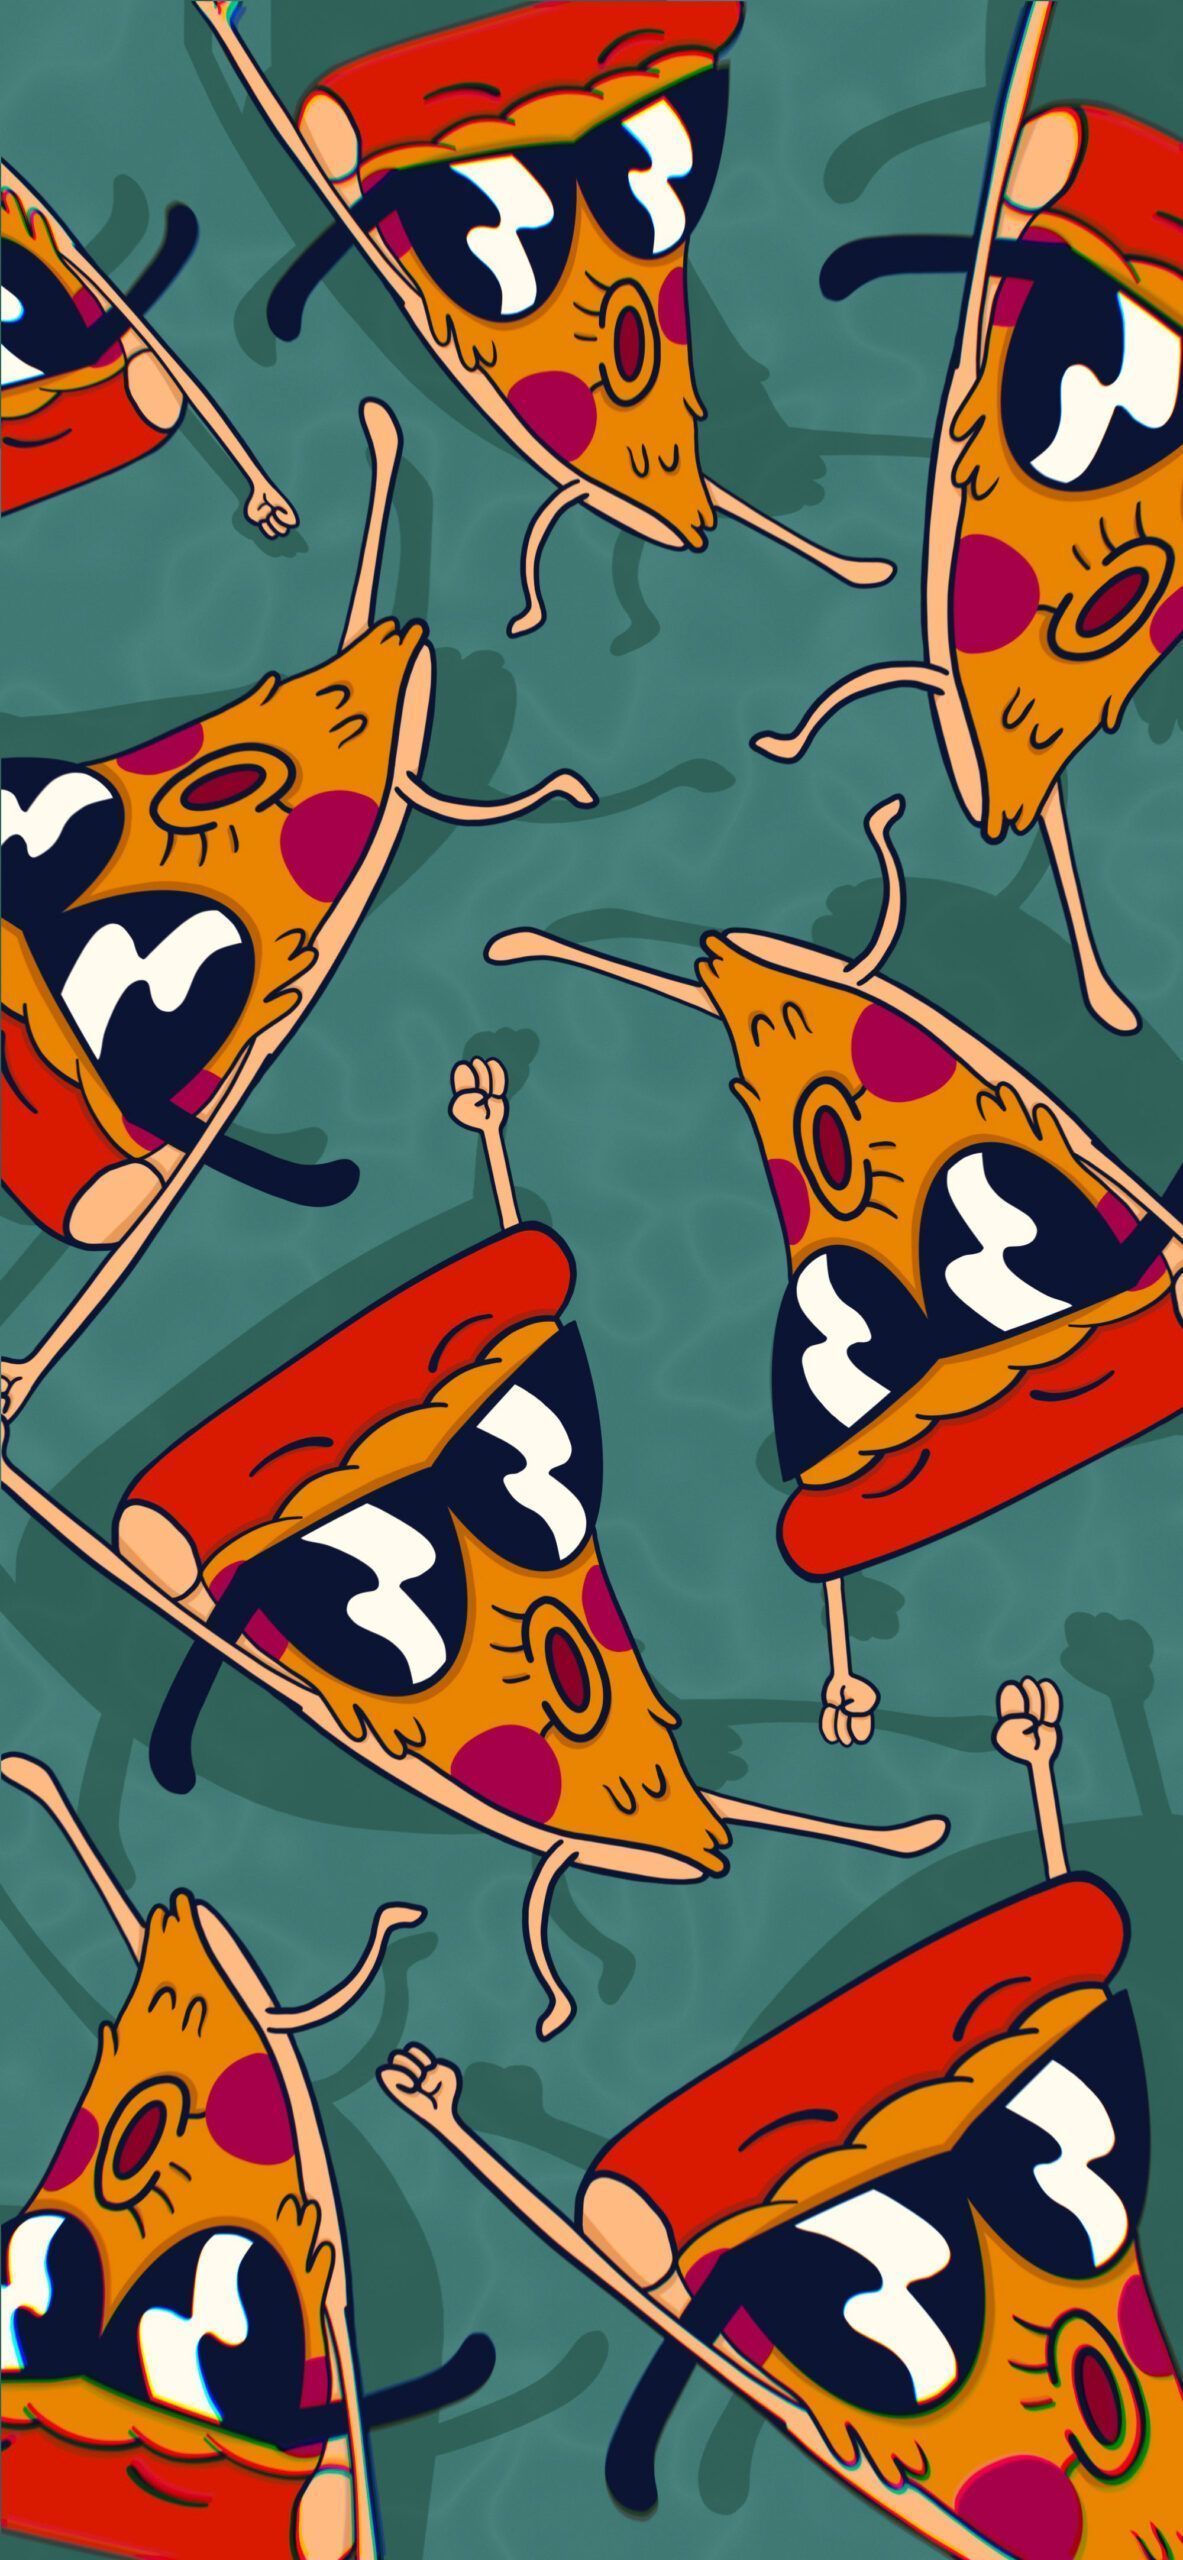 A cartoon pizza with sunglasses on it - Pizza